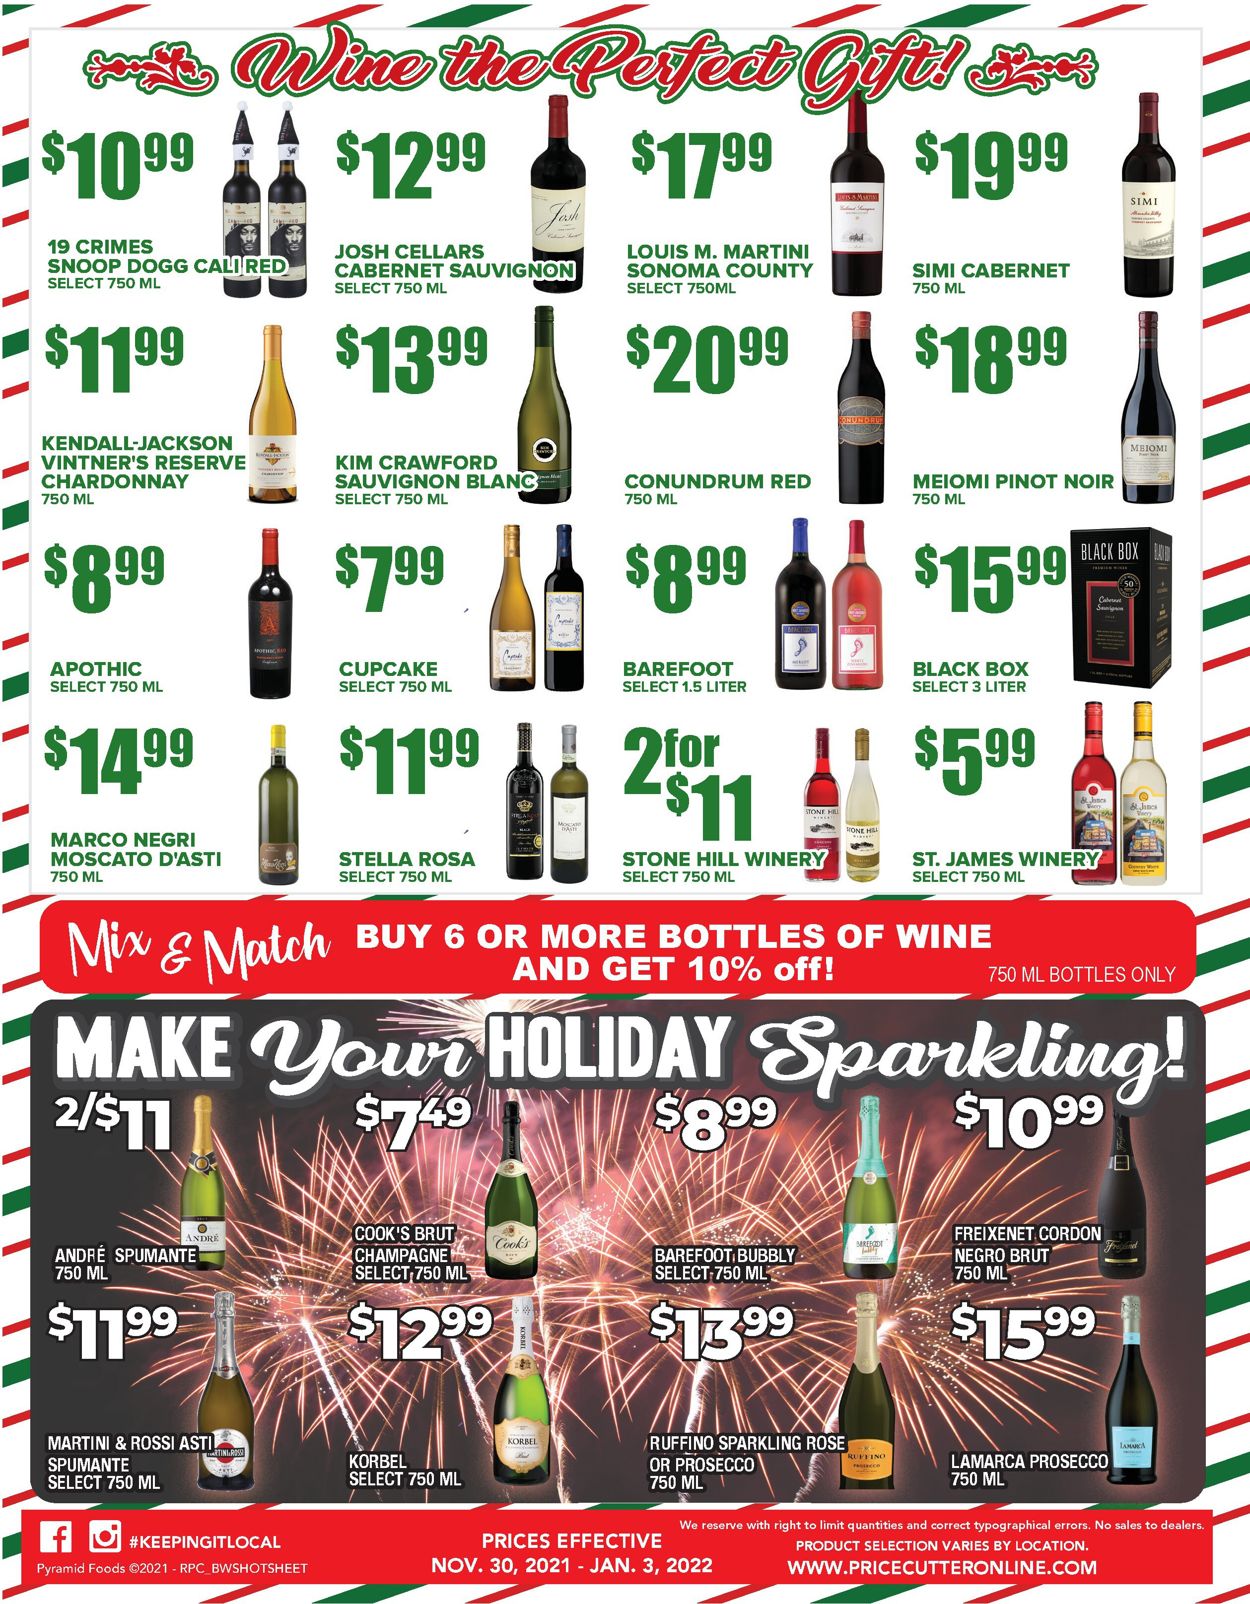 Price Cutter HOLIDAYS 2021 Weekly Ad Circular - valid 11/30-01/03/2022 (Page 3)